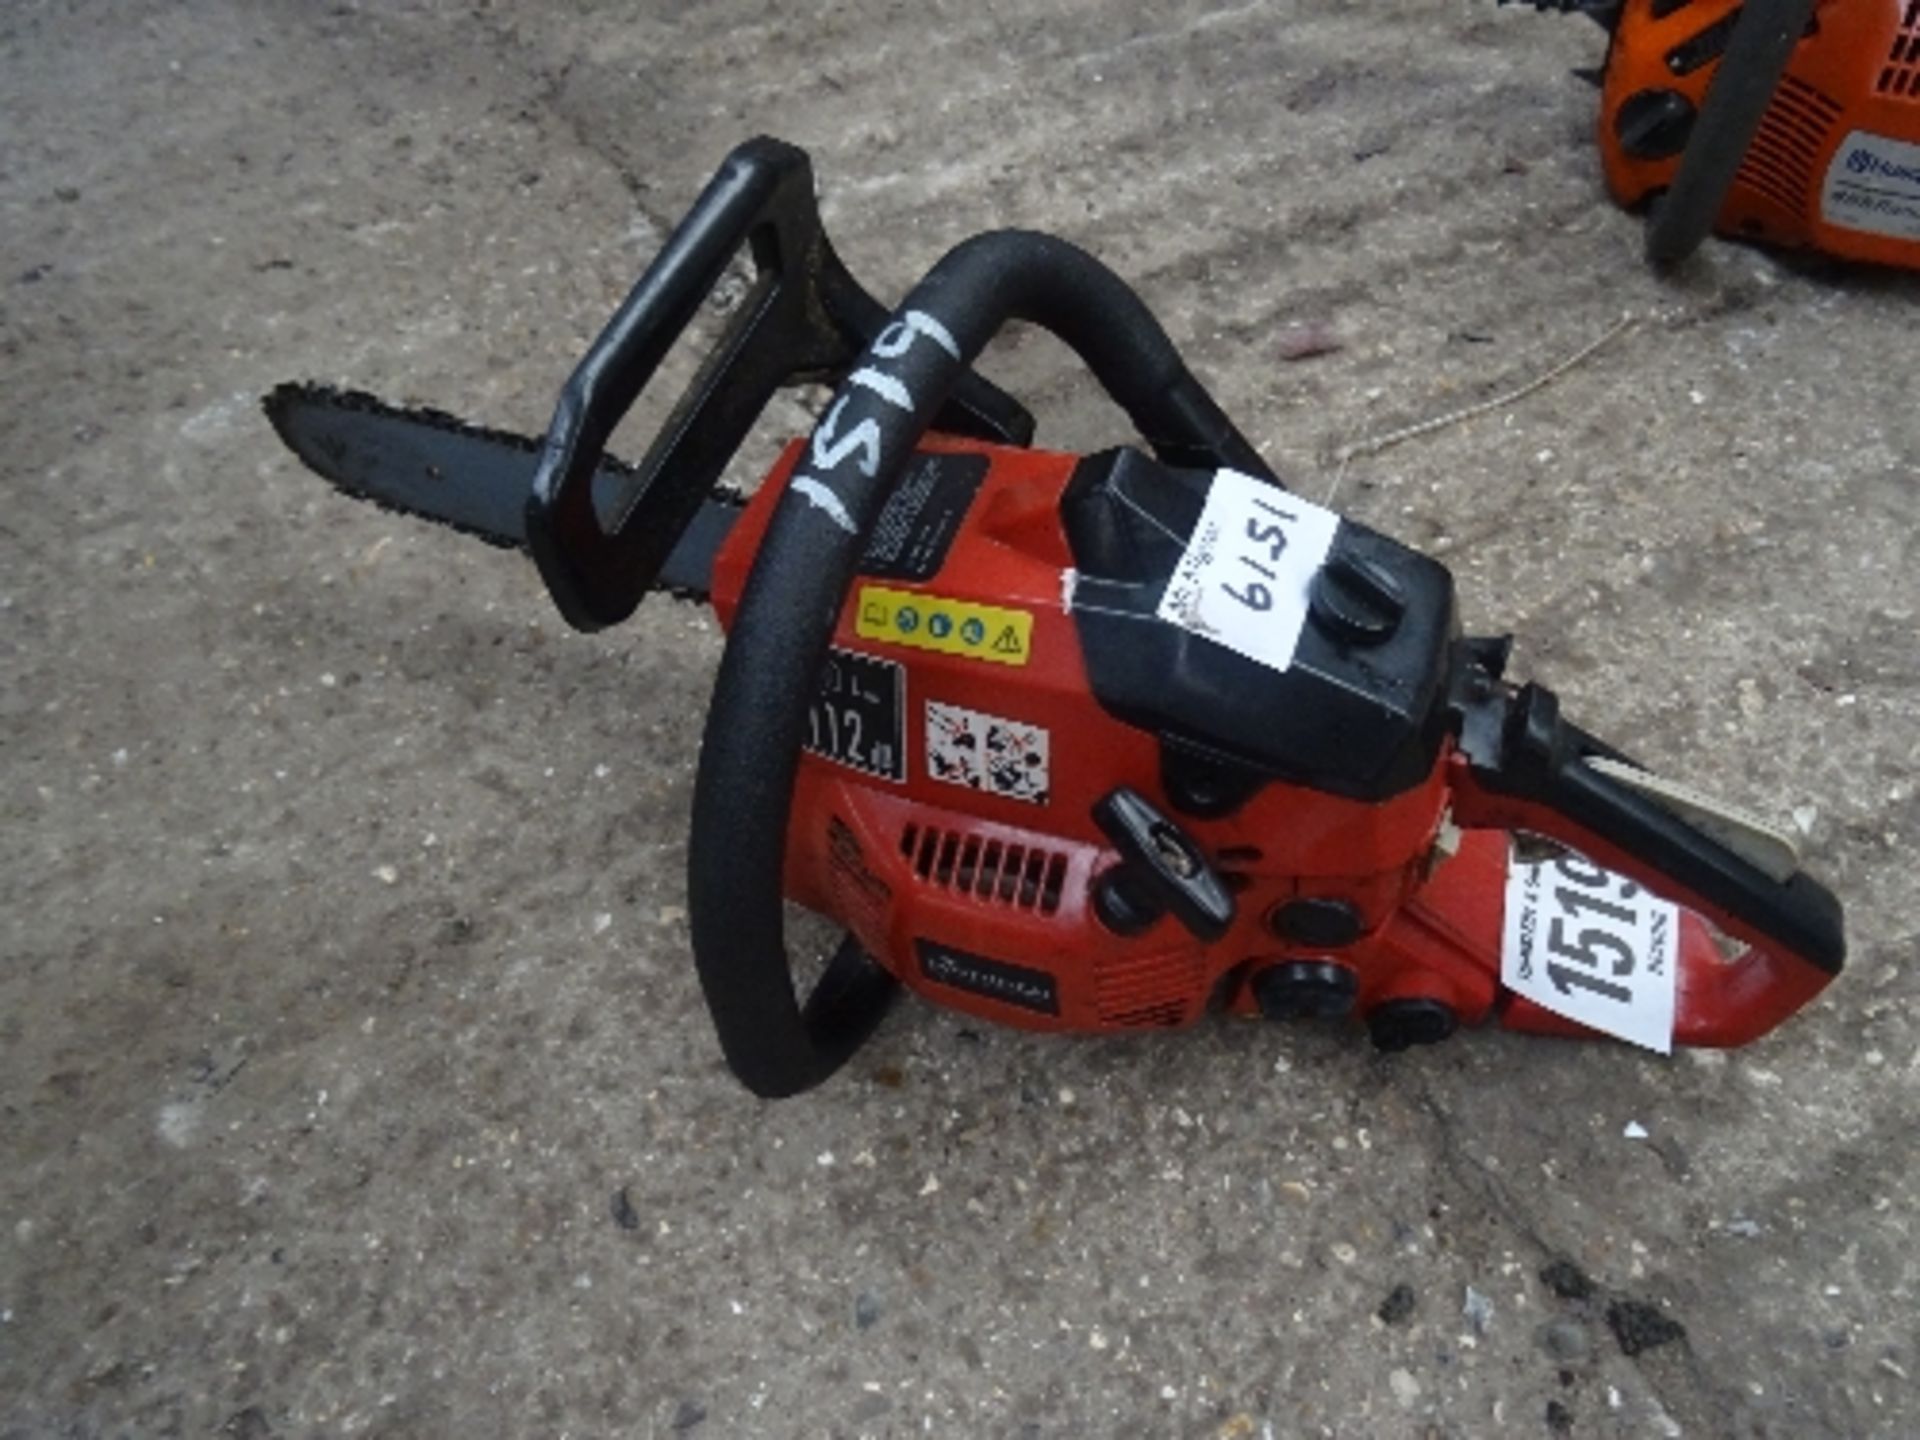 Sovereign SCS 37 chain saw